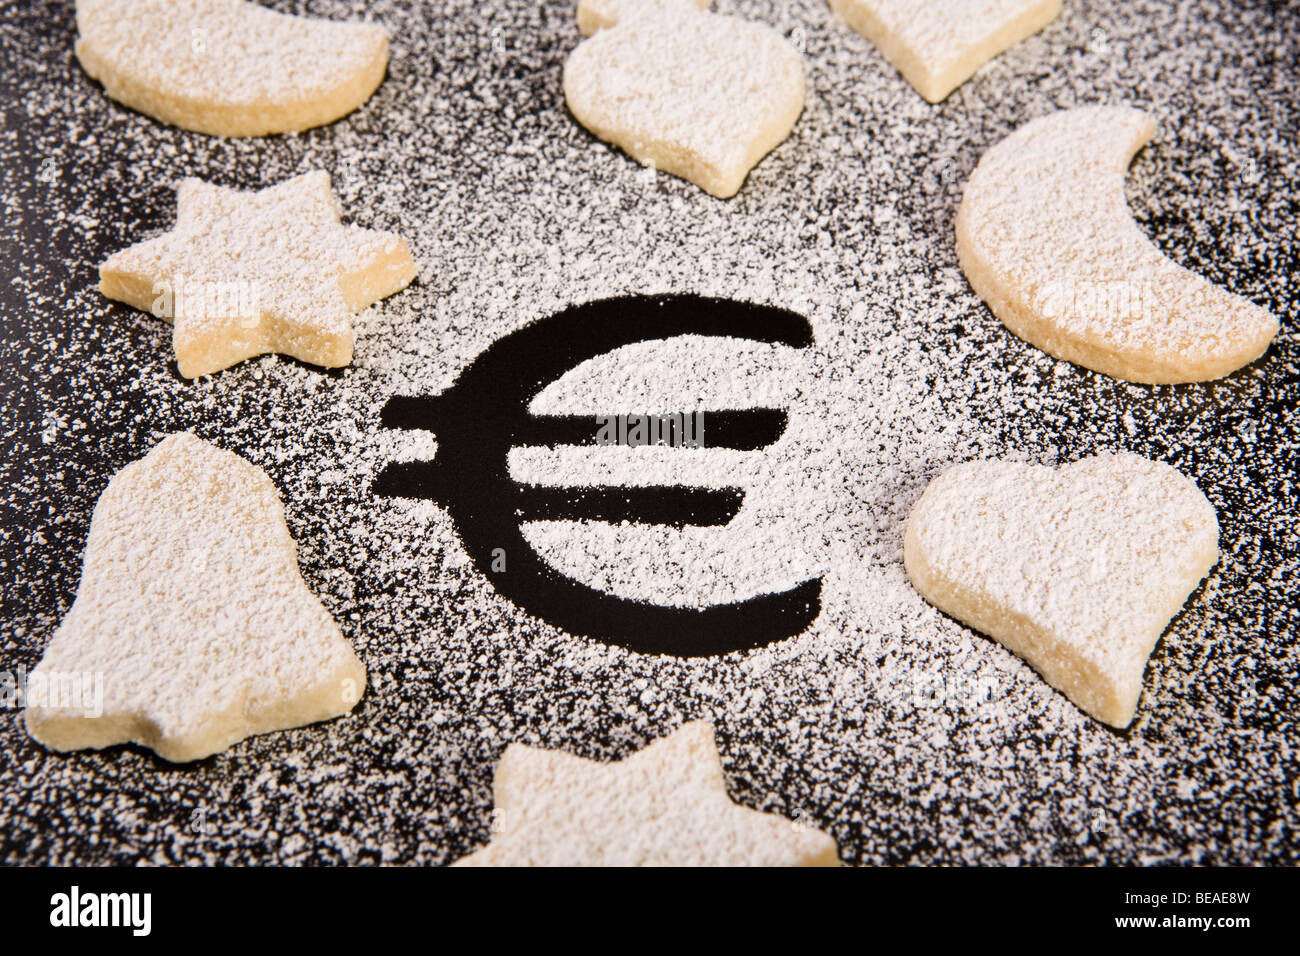 The Euro symbol in powdered sugar surrounded by various shaped cookies Stock Photo